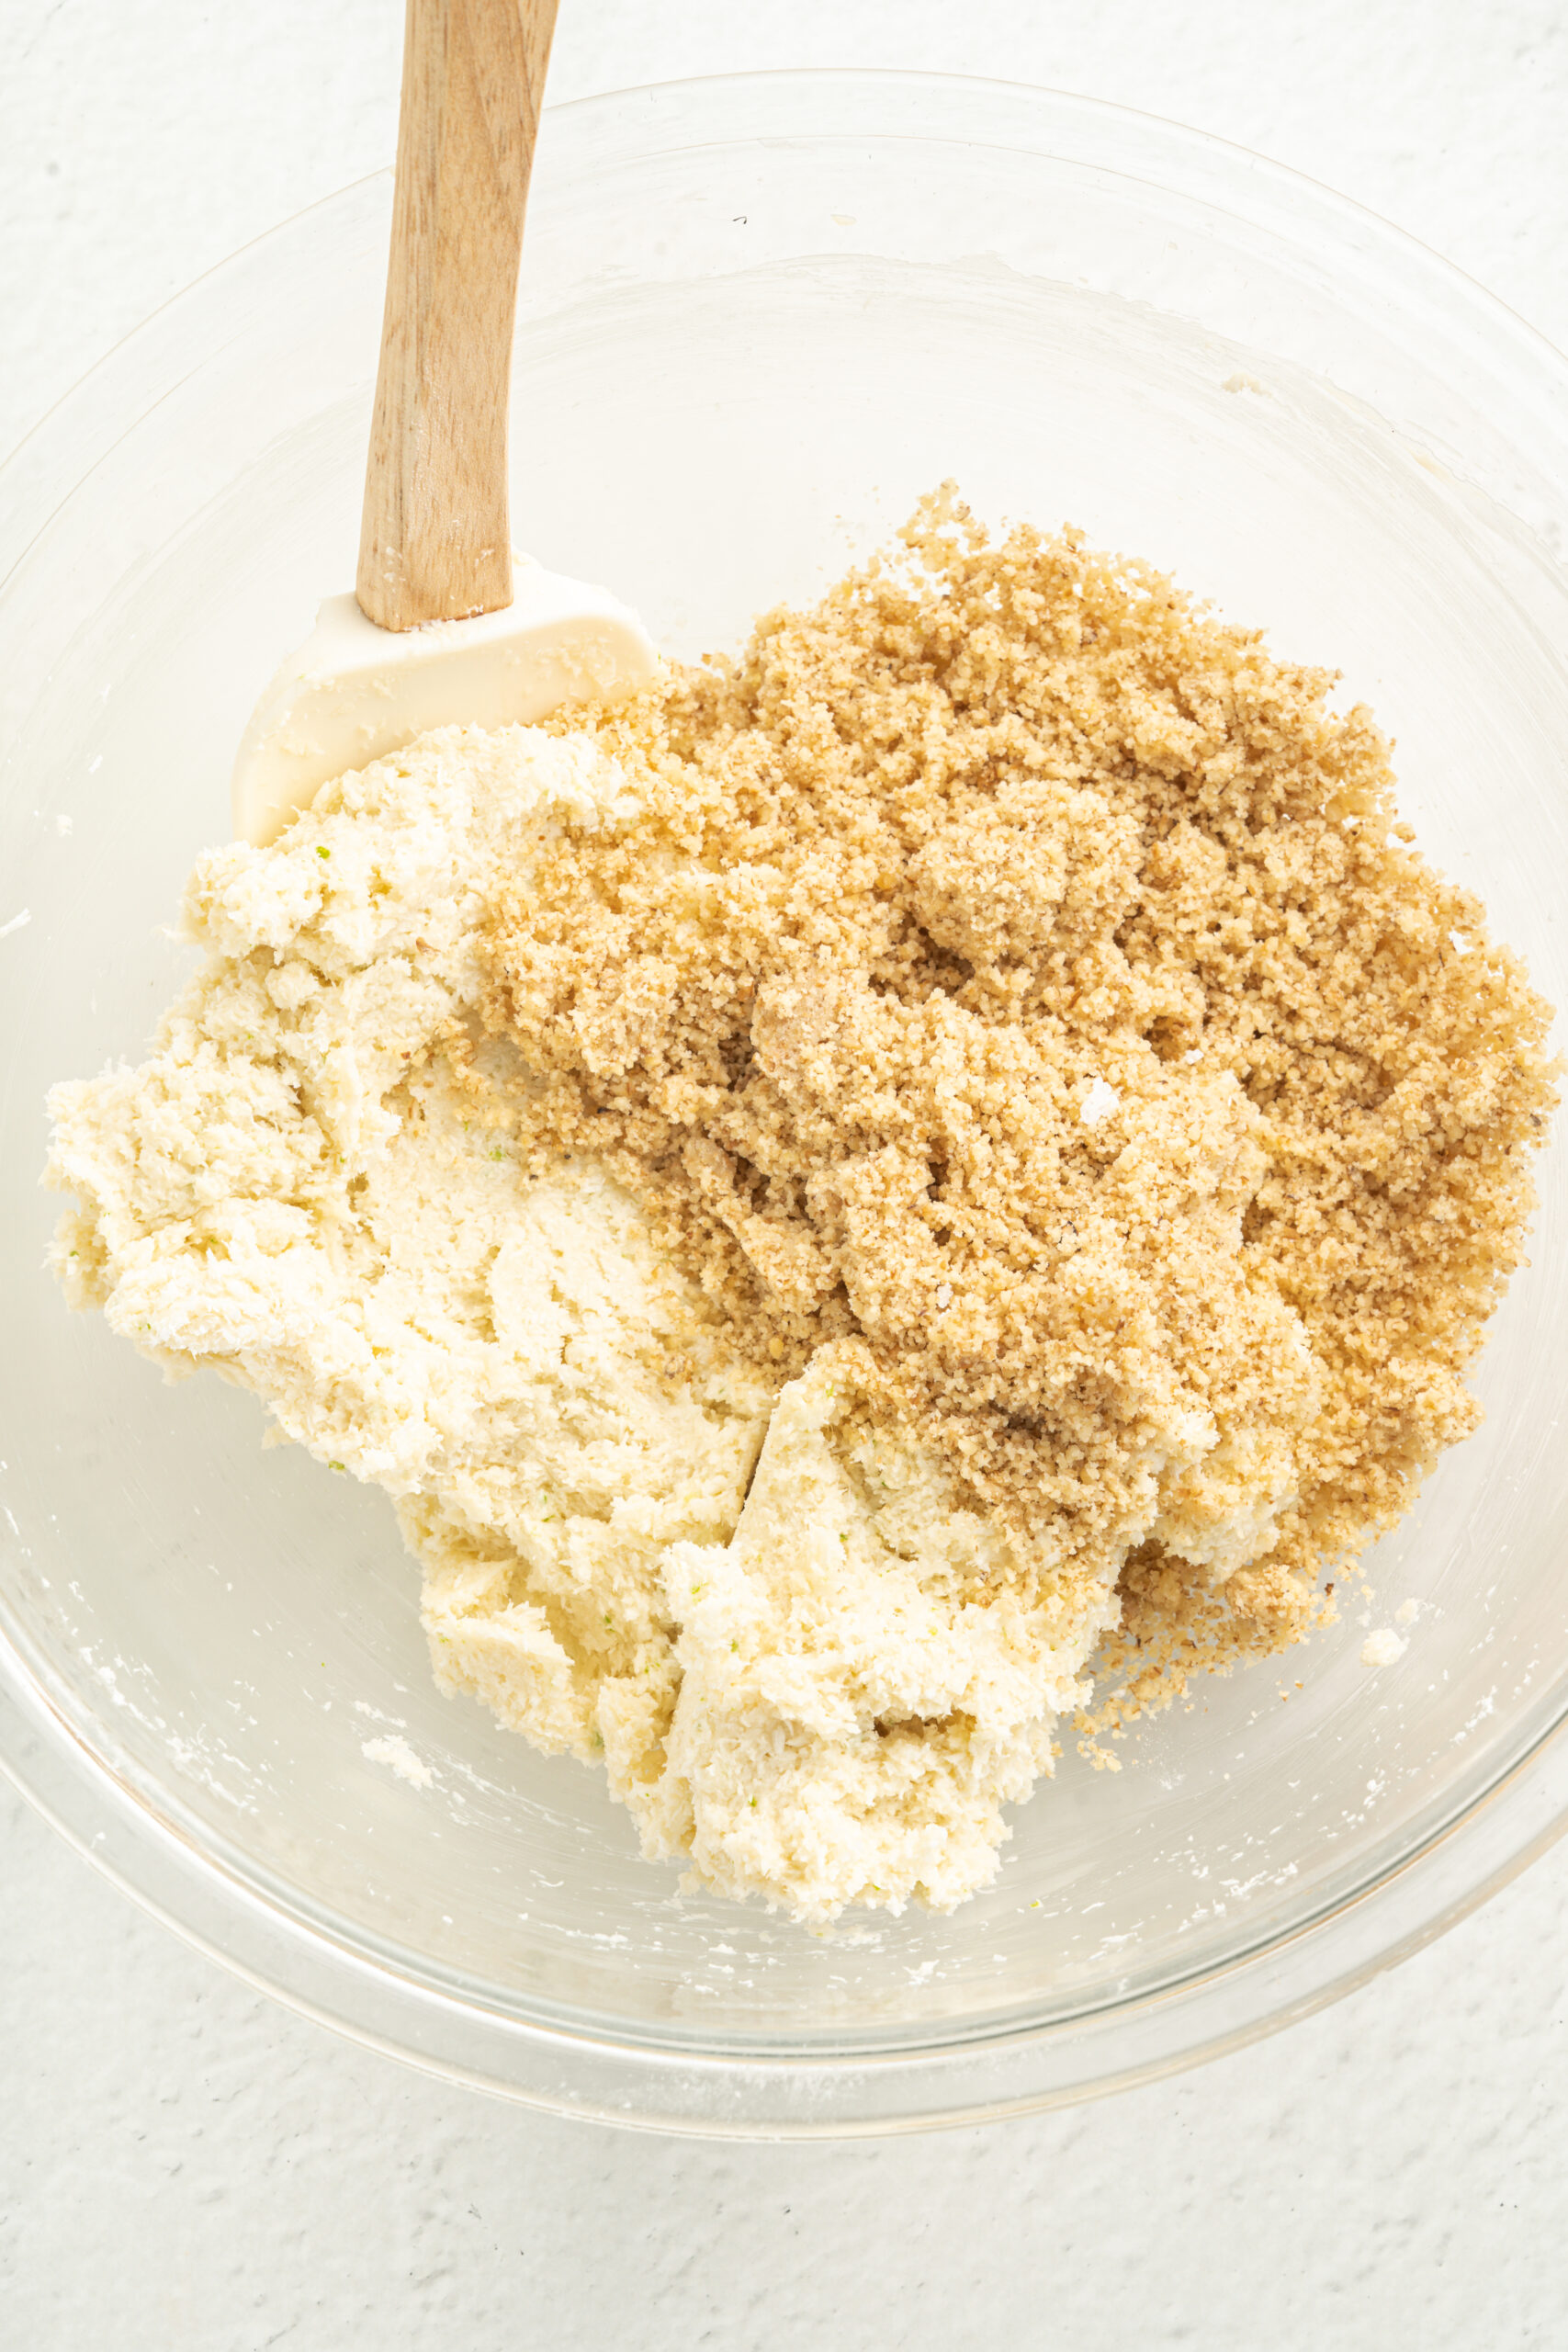 Cream cheese mixture with ground walnuts in mixing bowl.